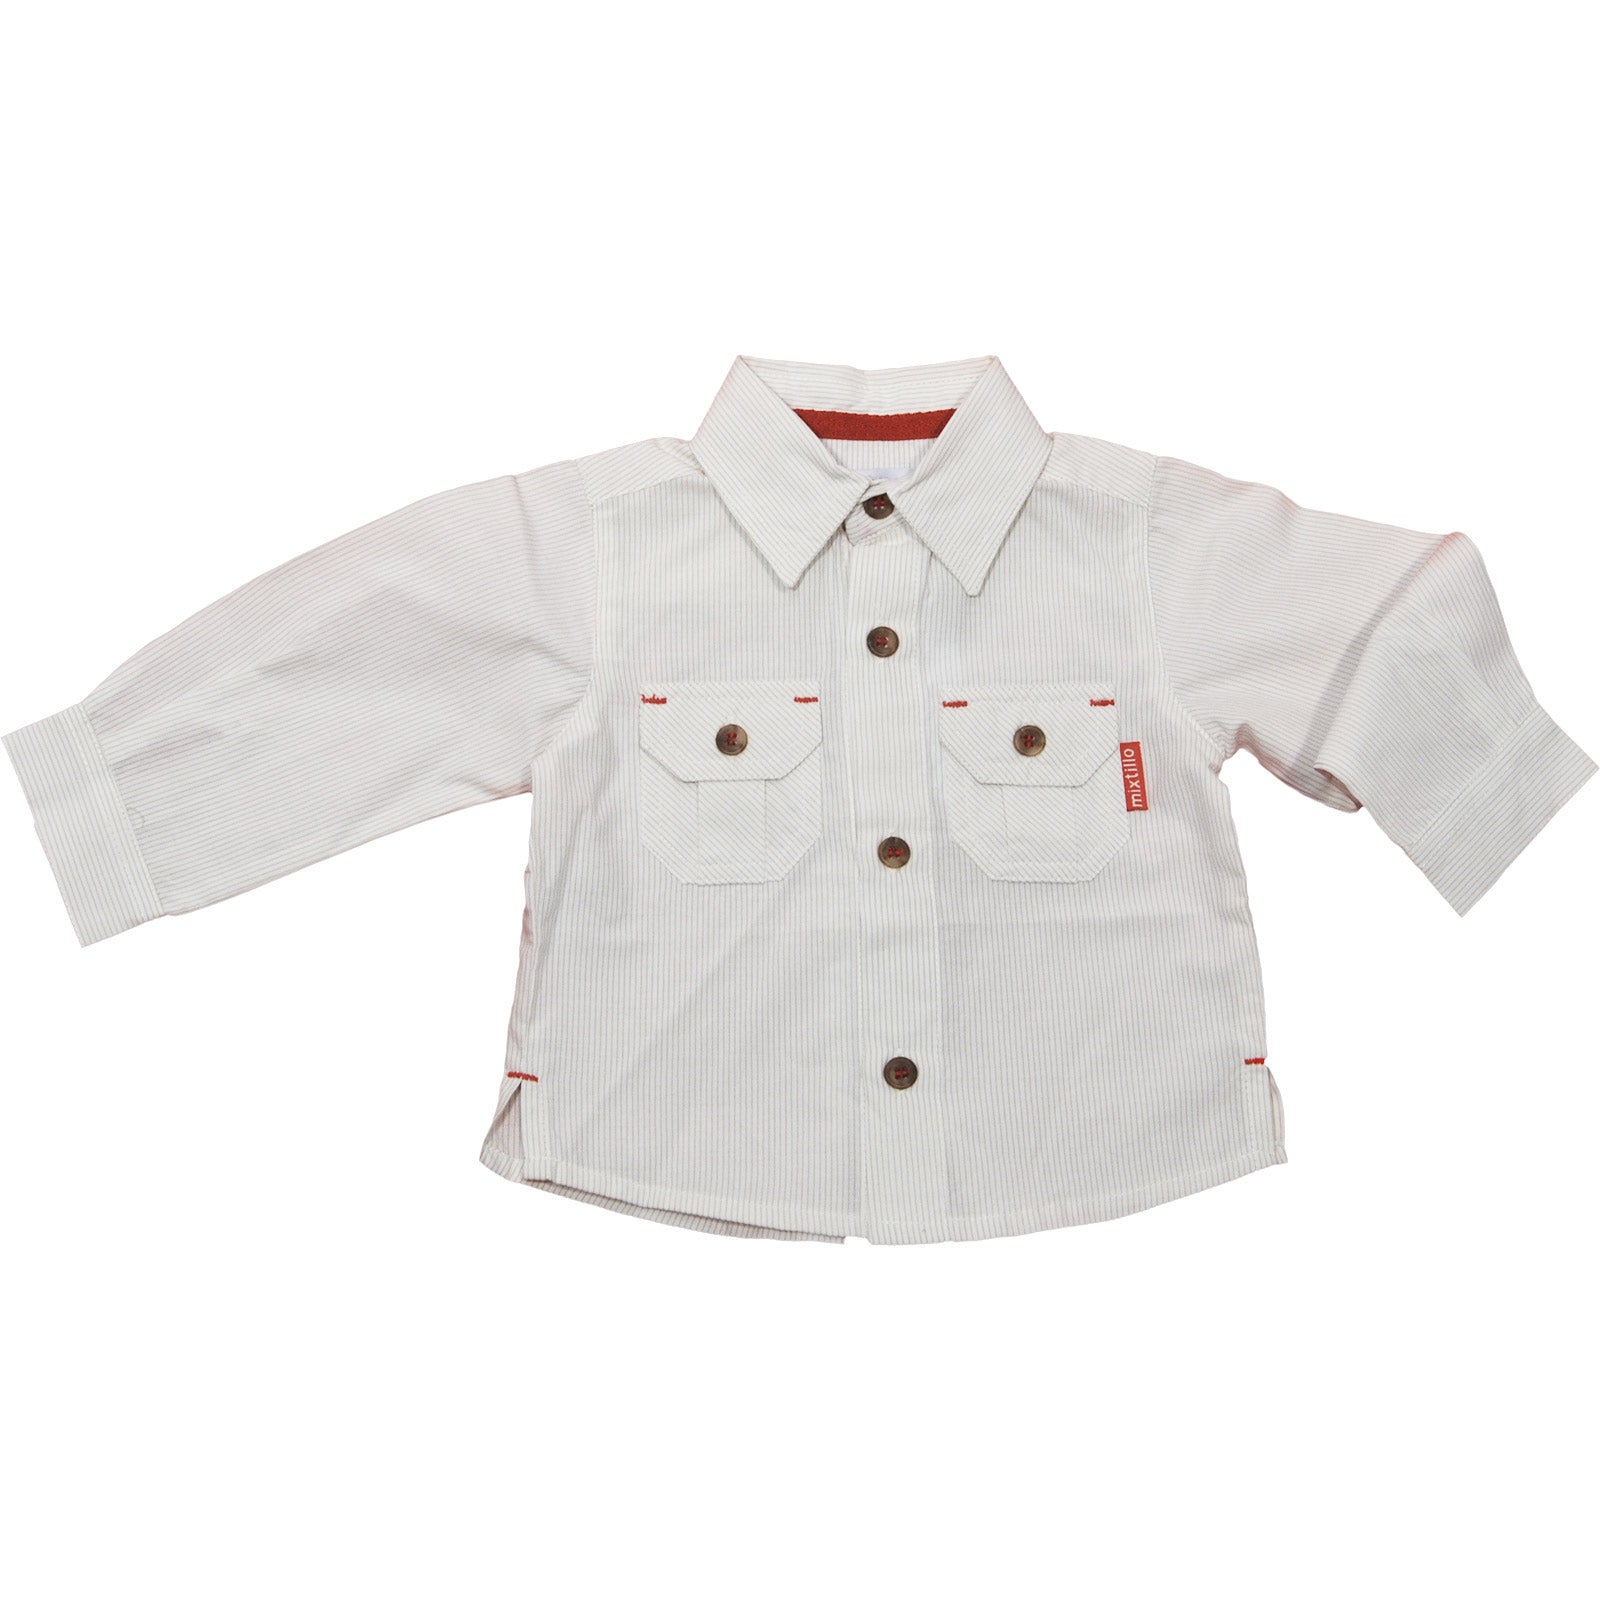 
  Shirt with pockets from the children's clothing line Blueberry on the front with burgundy trim...